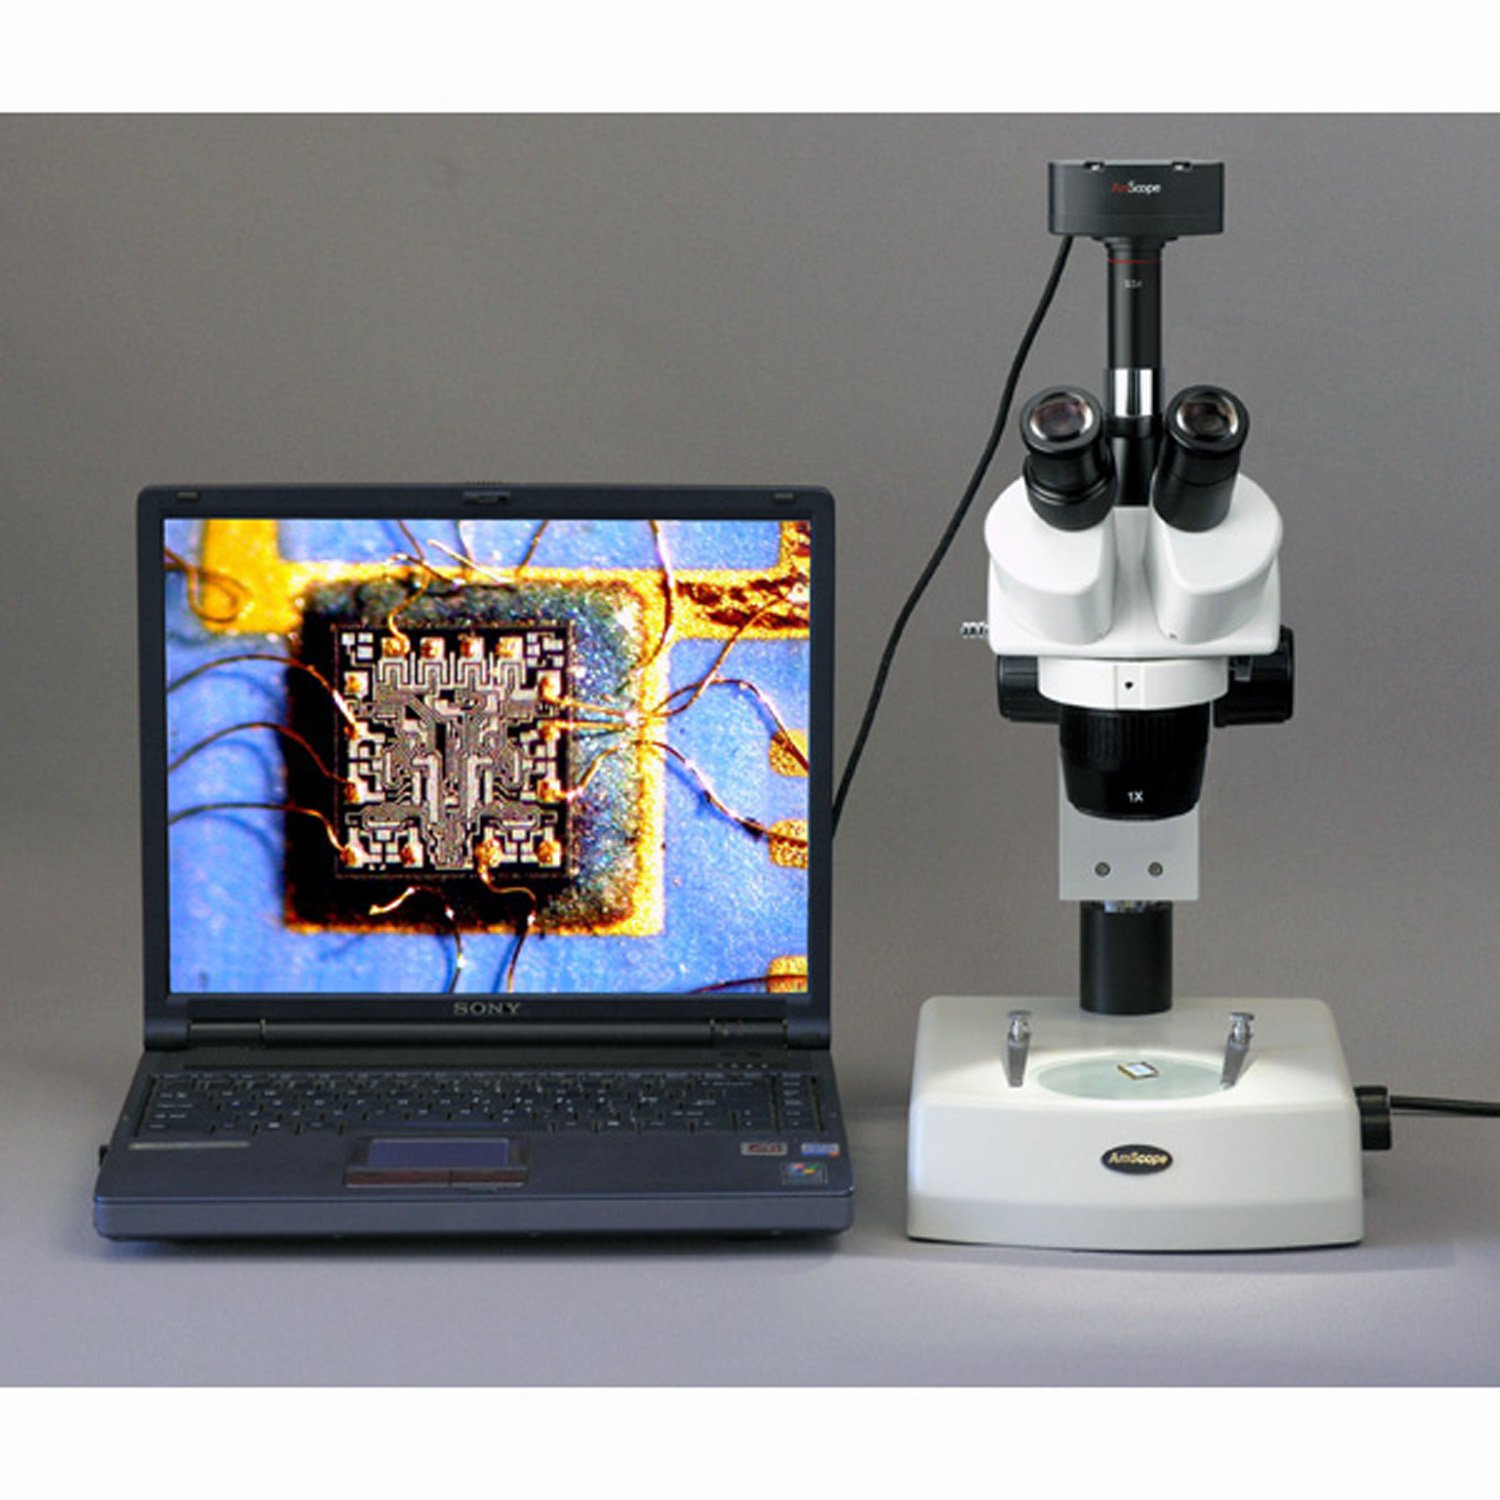 AmScope SW-2T24X Trinocular Stereo Microscope, WH10x Eyepieces, 10X/20X/40X Magnification, 2X/4X Objective, Upper and Lower Halogen Lighting, Pillar Stand, 110V-120V, Includes 0.5x Barlow Lens